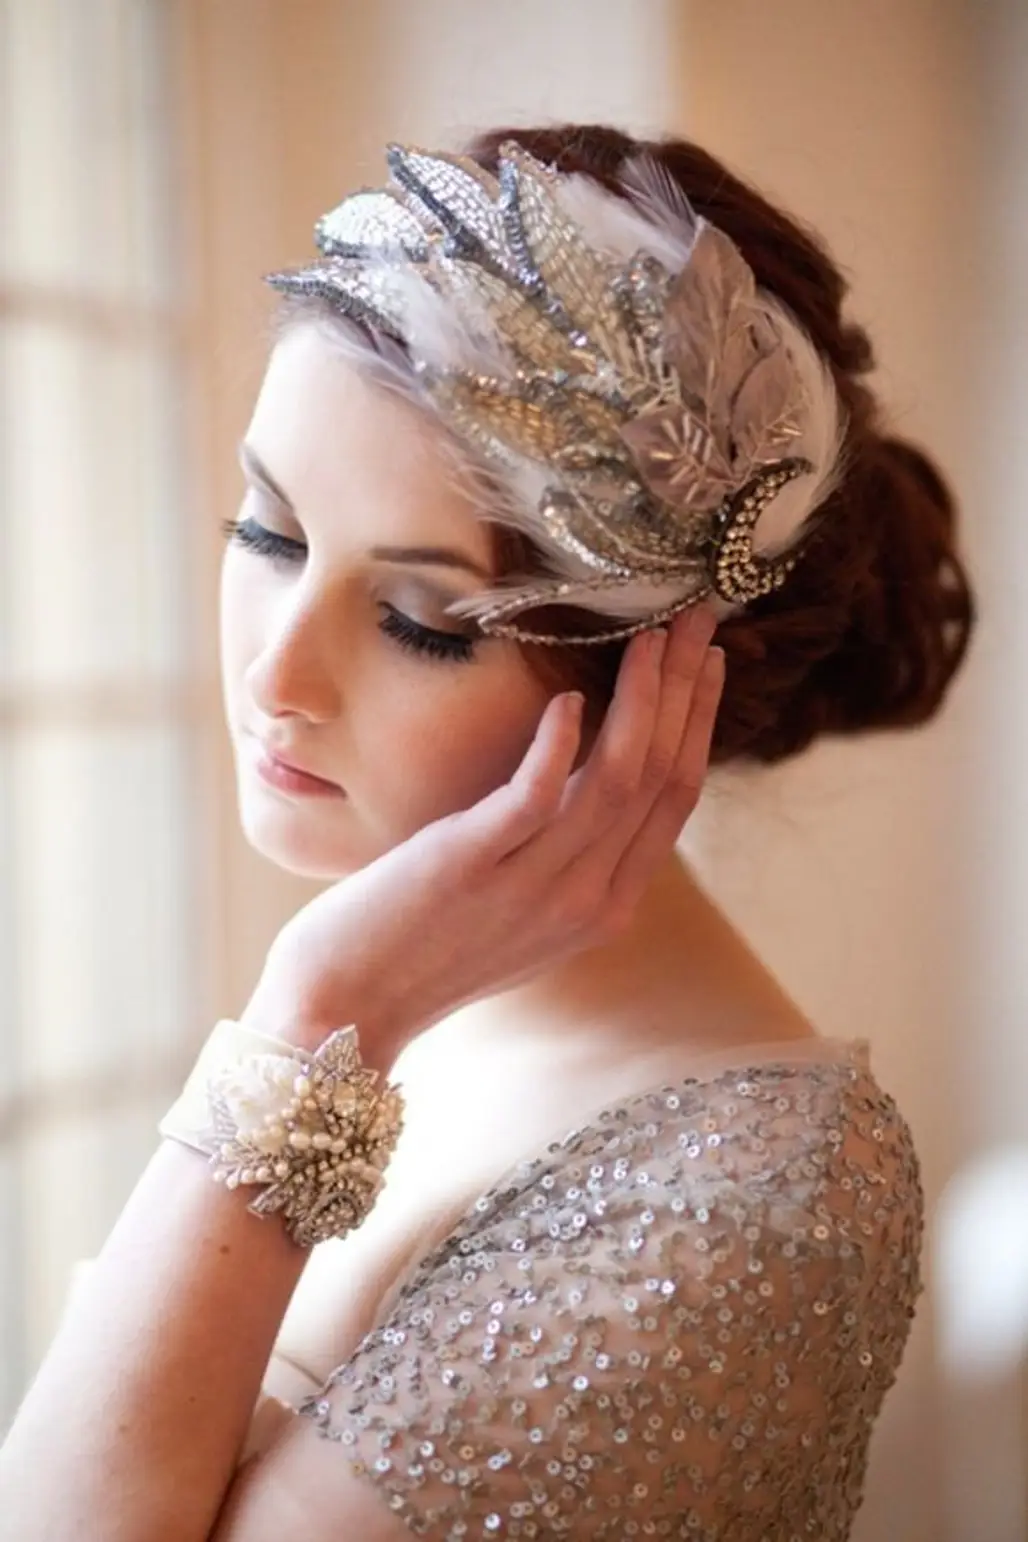 Vintage Hair Pieces Are a Fun Idea for Parties and Weddings